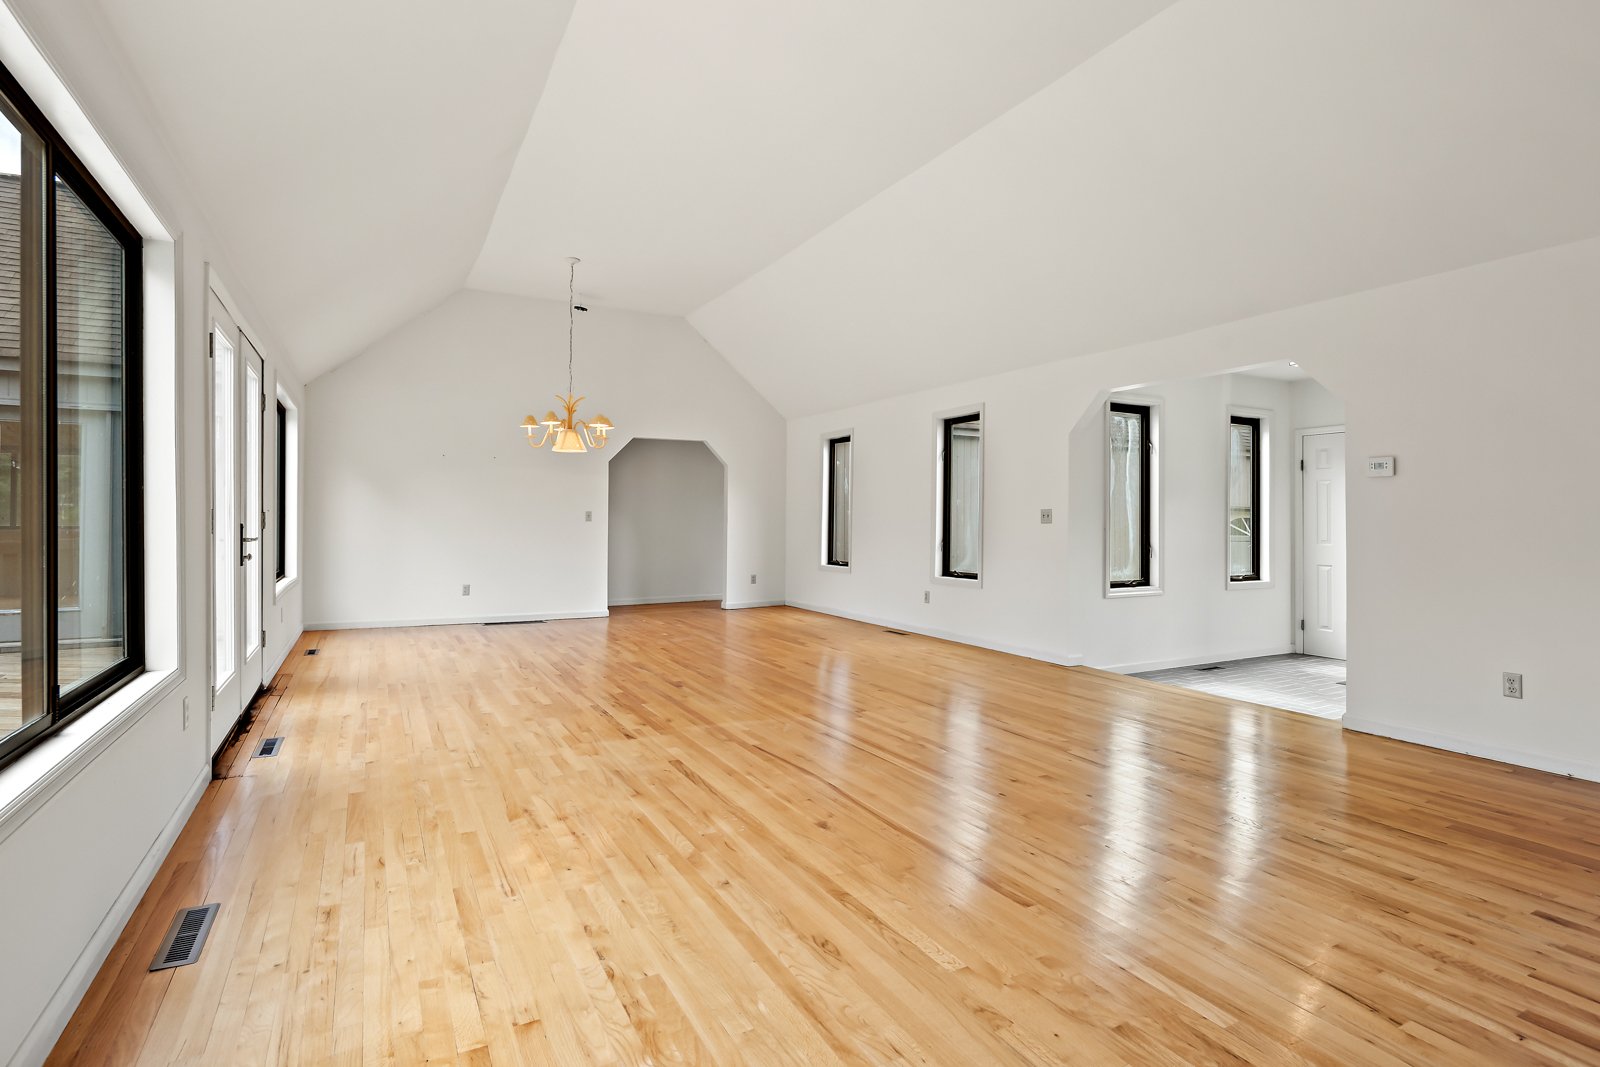 Foyer to living and dining room at 6 Old Field Lane Weston CT-13.jpg